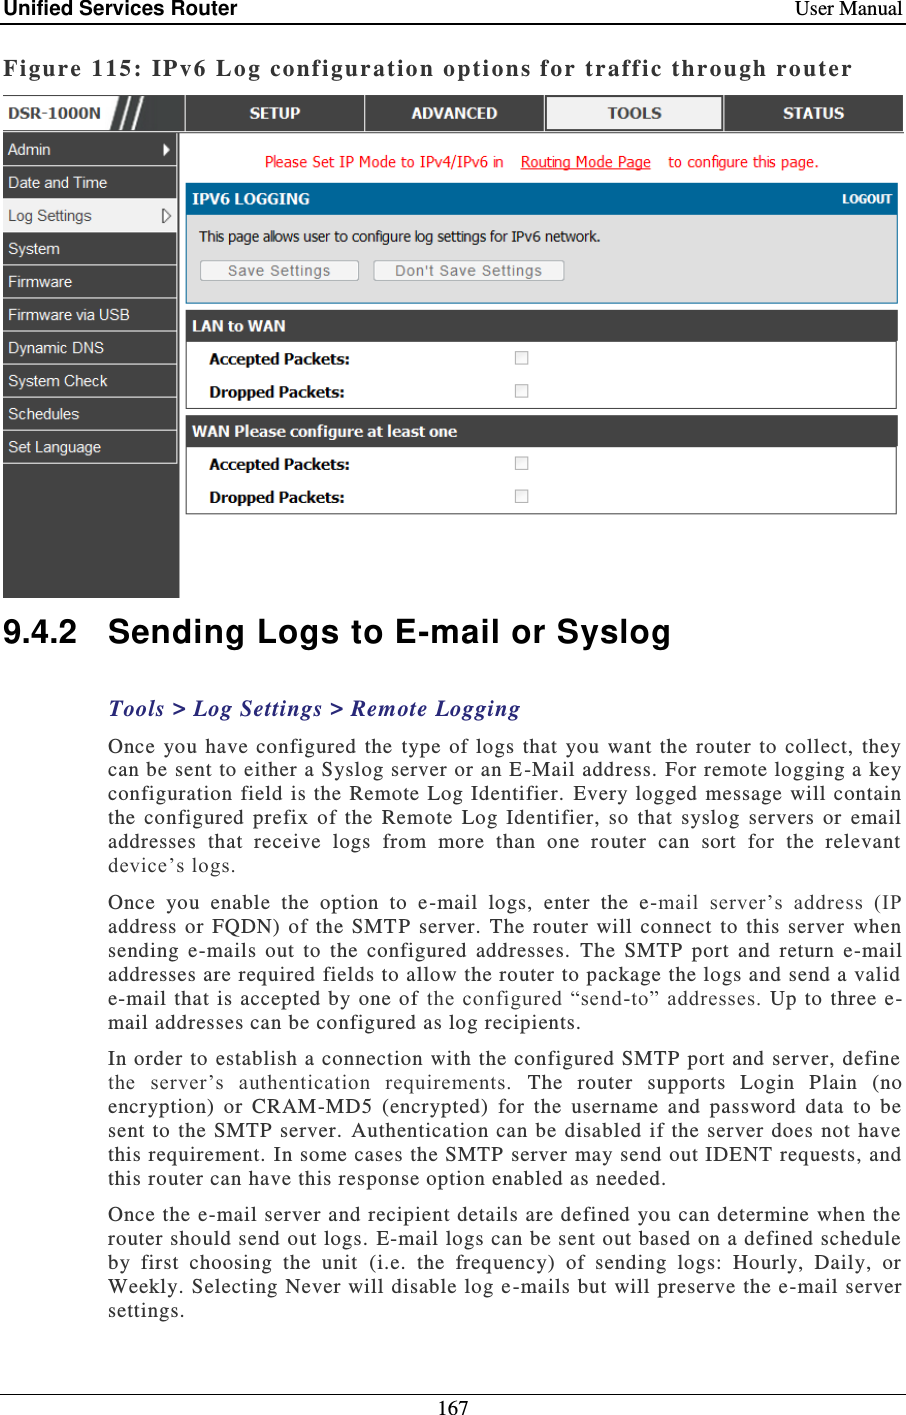 Unified Services Router    User Manual 167  Figure 115: IPv6 Log conf iguration options for traff ic through ro uter   9.4.2  Sending Logs to E-mail or Syslog Tools &gt; Log Settings &gt; Remote Logging Once  you  have  configured  the  type  of  logs  that  you  want the  router  to  collect,  they can be sent to either a Syslog server or an E -Mail address. For remote logging a key configuration field  is the Remote  Log  Identifier.   Every logged  message  will contain the  configured  prefix  of  the  Remote  Log  Identifier,  so  that  syslog  servers  or  email addresses  that  receive  logs  from  more  than  one  router  can  sort  for  the  relevant device’s logs.  Once  you  enable  the  option  to  e -mail  logs,  enter  the  e-mail  server’s  address  (IP address or  FQDN)  of the  SMT P  server.  The  router  will  connect  to  this  server  when sending  e-mails  out  to  the  configured  addresses.  The  SMTP  port  and  return  e-mail addresses are required fields to allow the router to package the logs and send a valid e-mail that  is  accepted by  one  of  the  configured  “send-to” addresses. Up to  three  e-mail addresses can be configured as log recipients.  In order to establish a connection  with the configured SMTP port and server, define the  server’s  authentication  requirements.  The  router  supports  Login  Plain  (no encryption)  or  CRAM-MD5  (encrypted)  for  the  username  and  password  data  to  be sent to the SMTP server.  Authentication can be disabled  if  the server  does not have this requirement. In some cases the SMTP  server may send out IDENT requests, and this router can have this response option enabled as needed. Once the e-mail server and recipient details are defined you can determine when the router should send out logs. E-mail logs can be sent out based on a defined schedule by  first  choosing  the  unit  (i.e.  the  frequency)  of  sending  logs:  Hourly,  Daily,  or Weekly. Selecting Never will disable log e -mails but will preserve the e-mail server settings.  